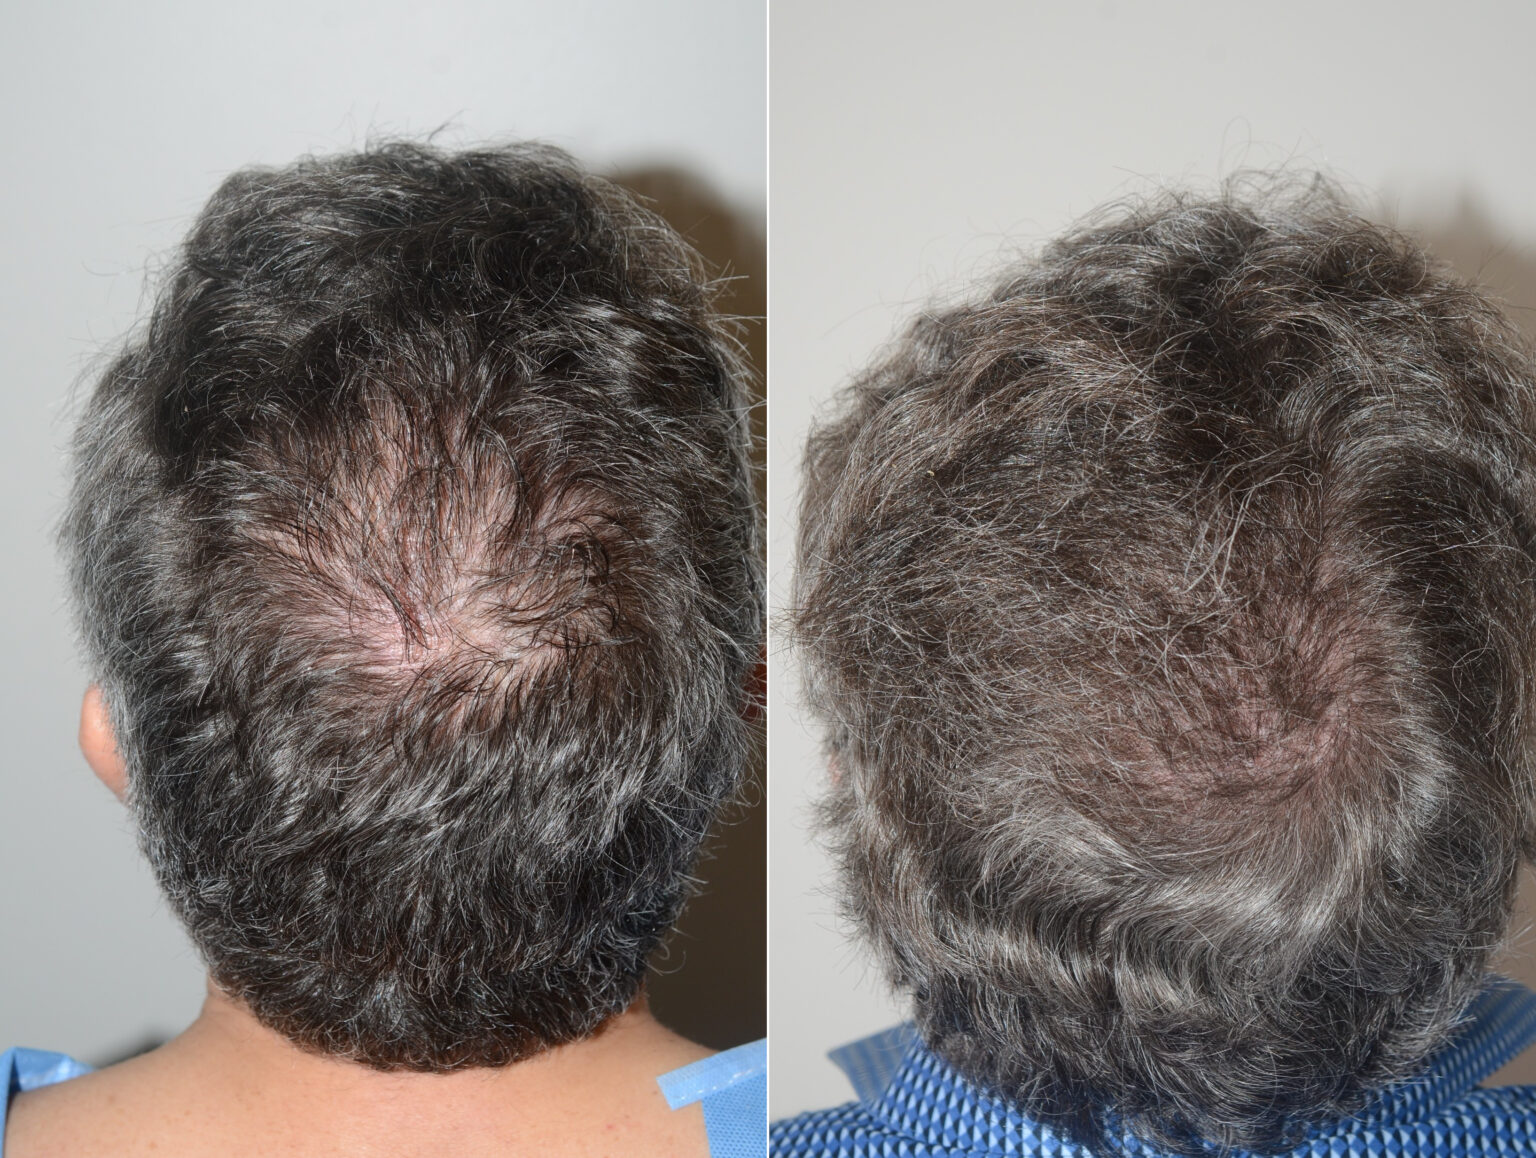 Body Hair Transplant Before And After Photos Foundation For Hair